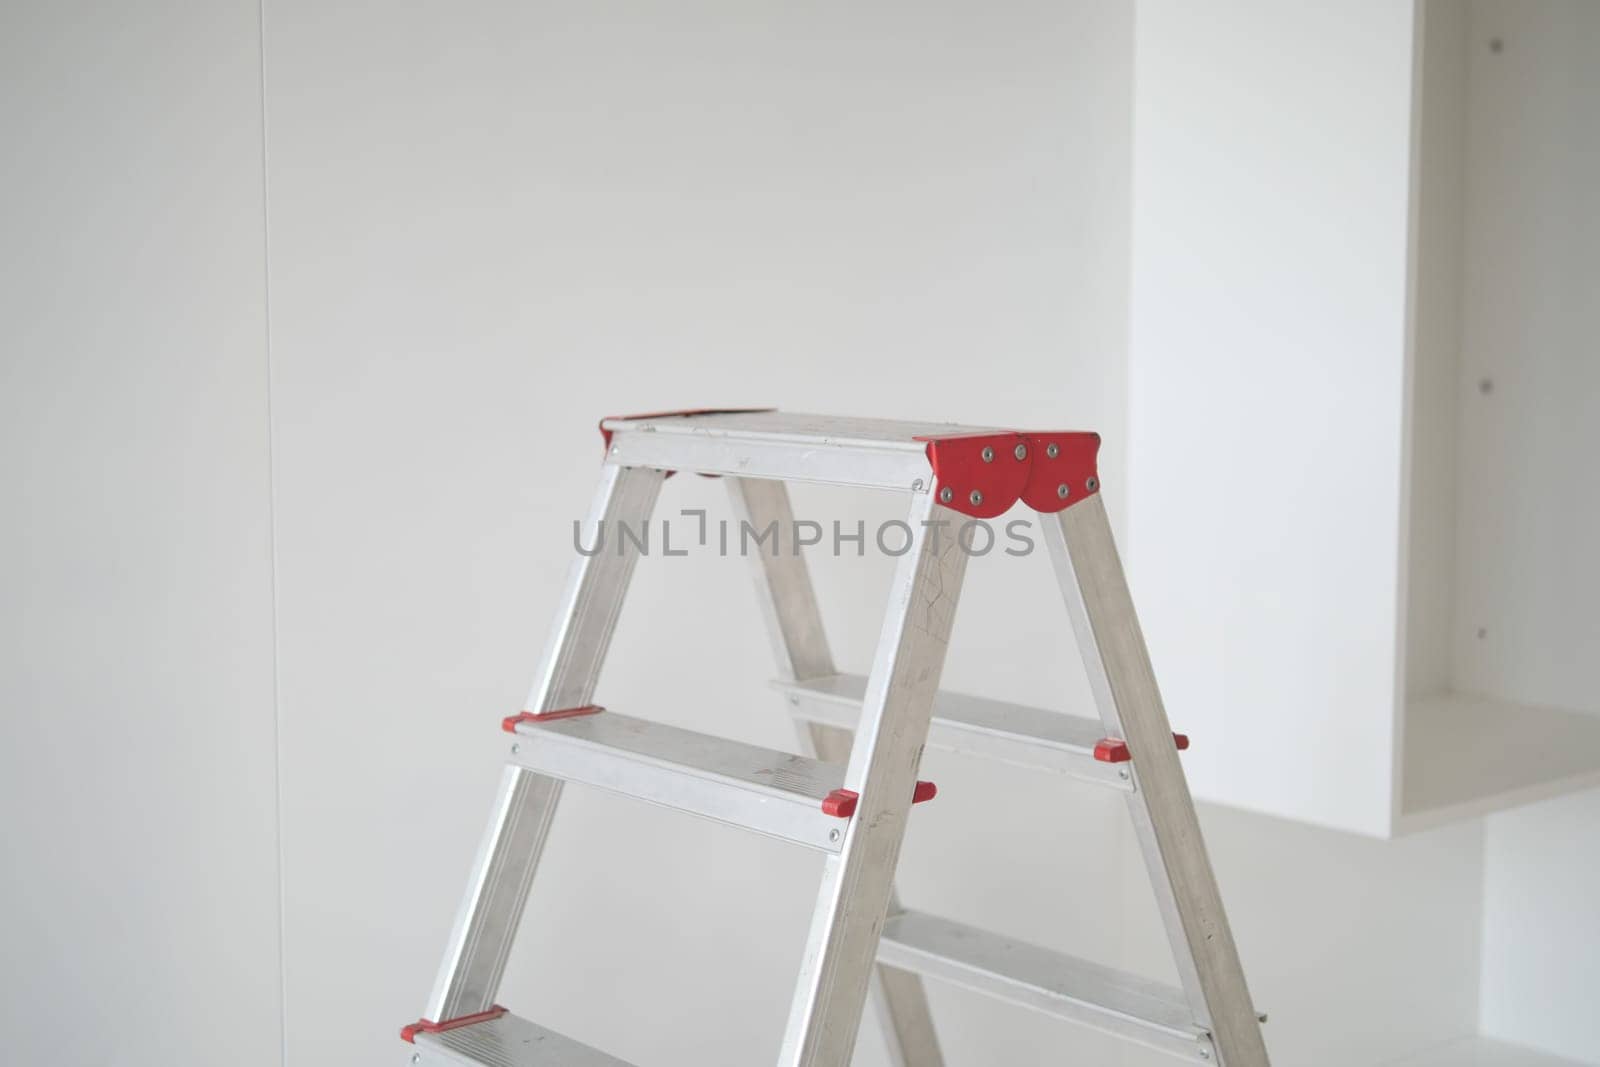 Metal ladder standing in empty room, renovation and improvement concept